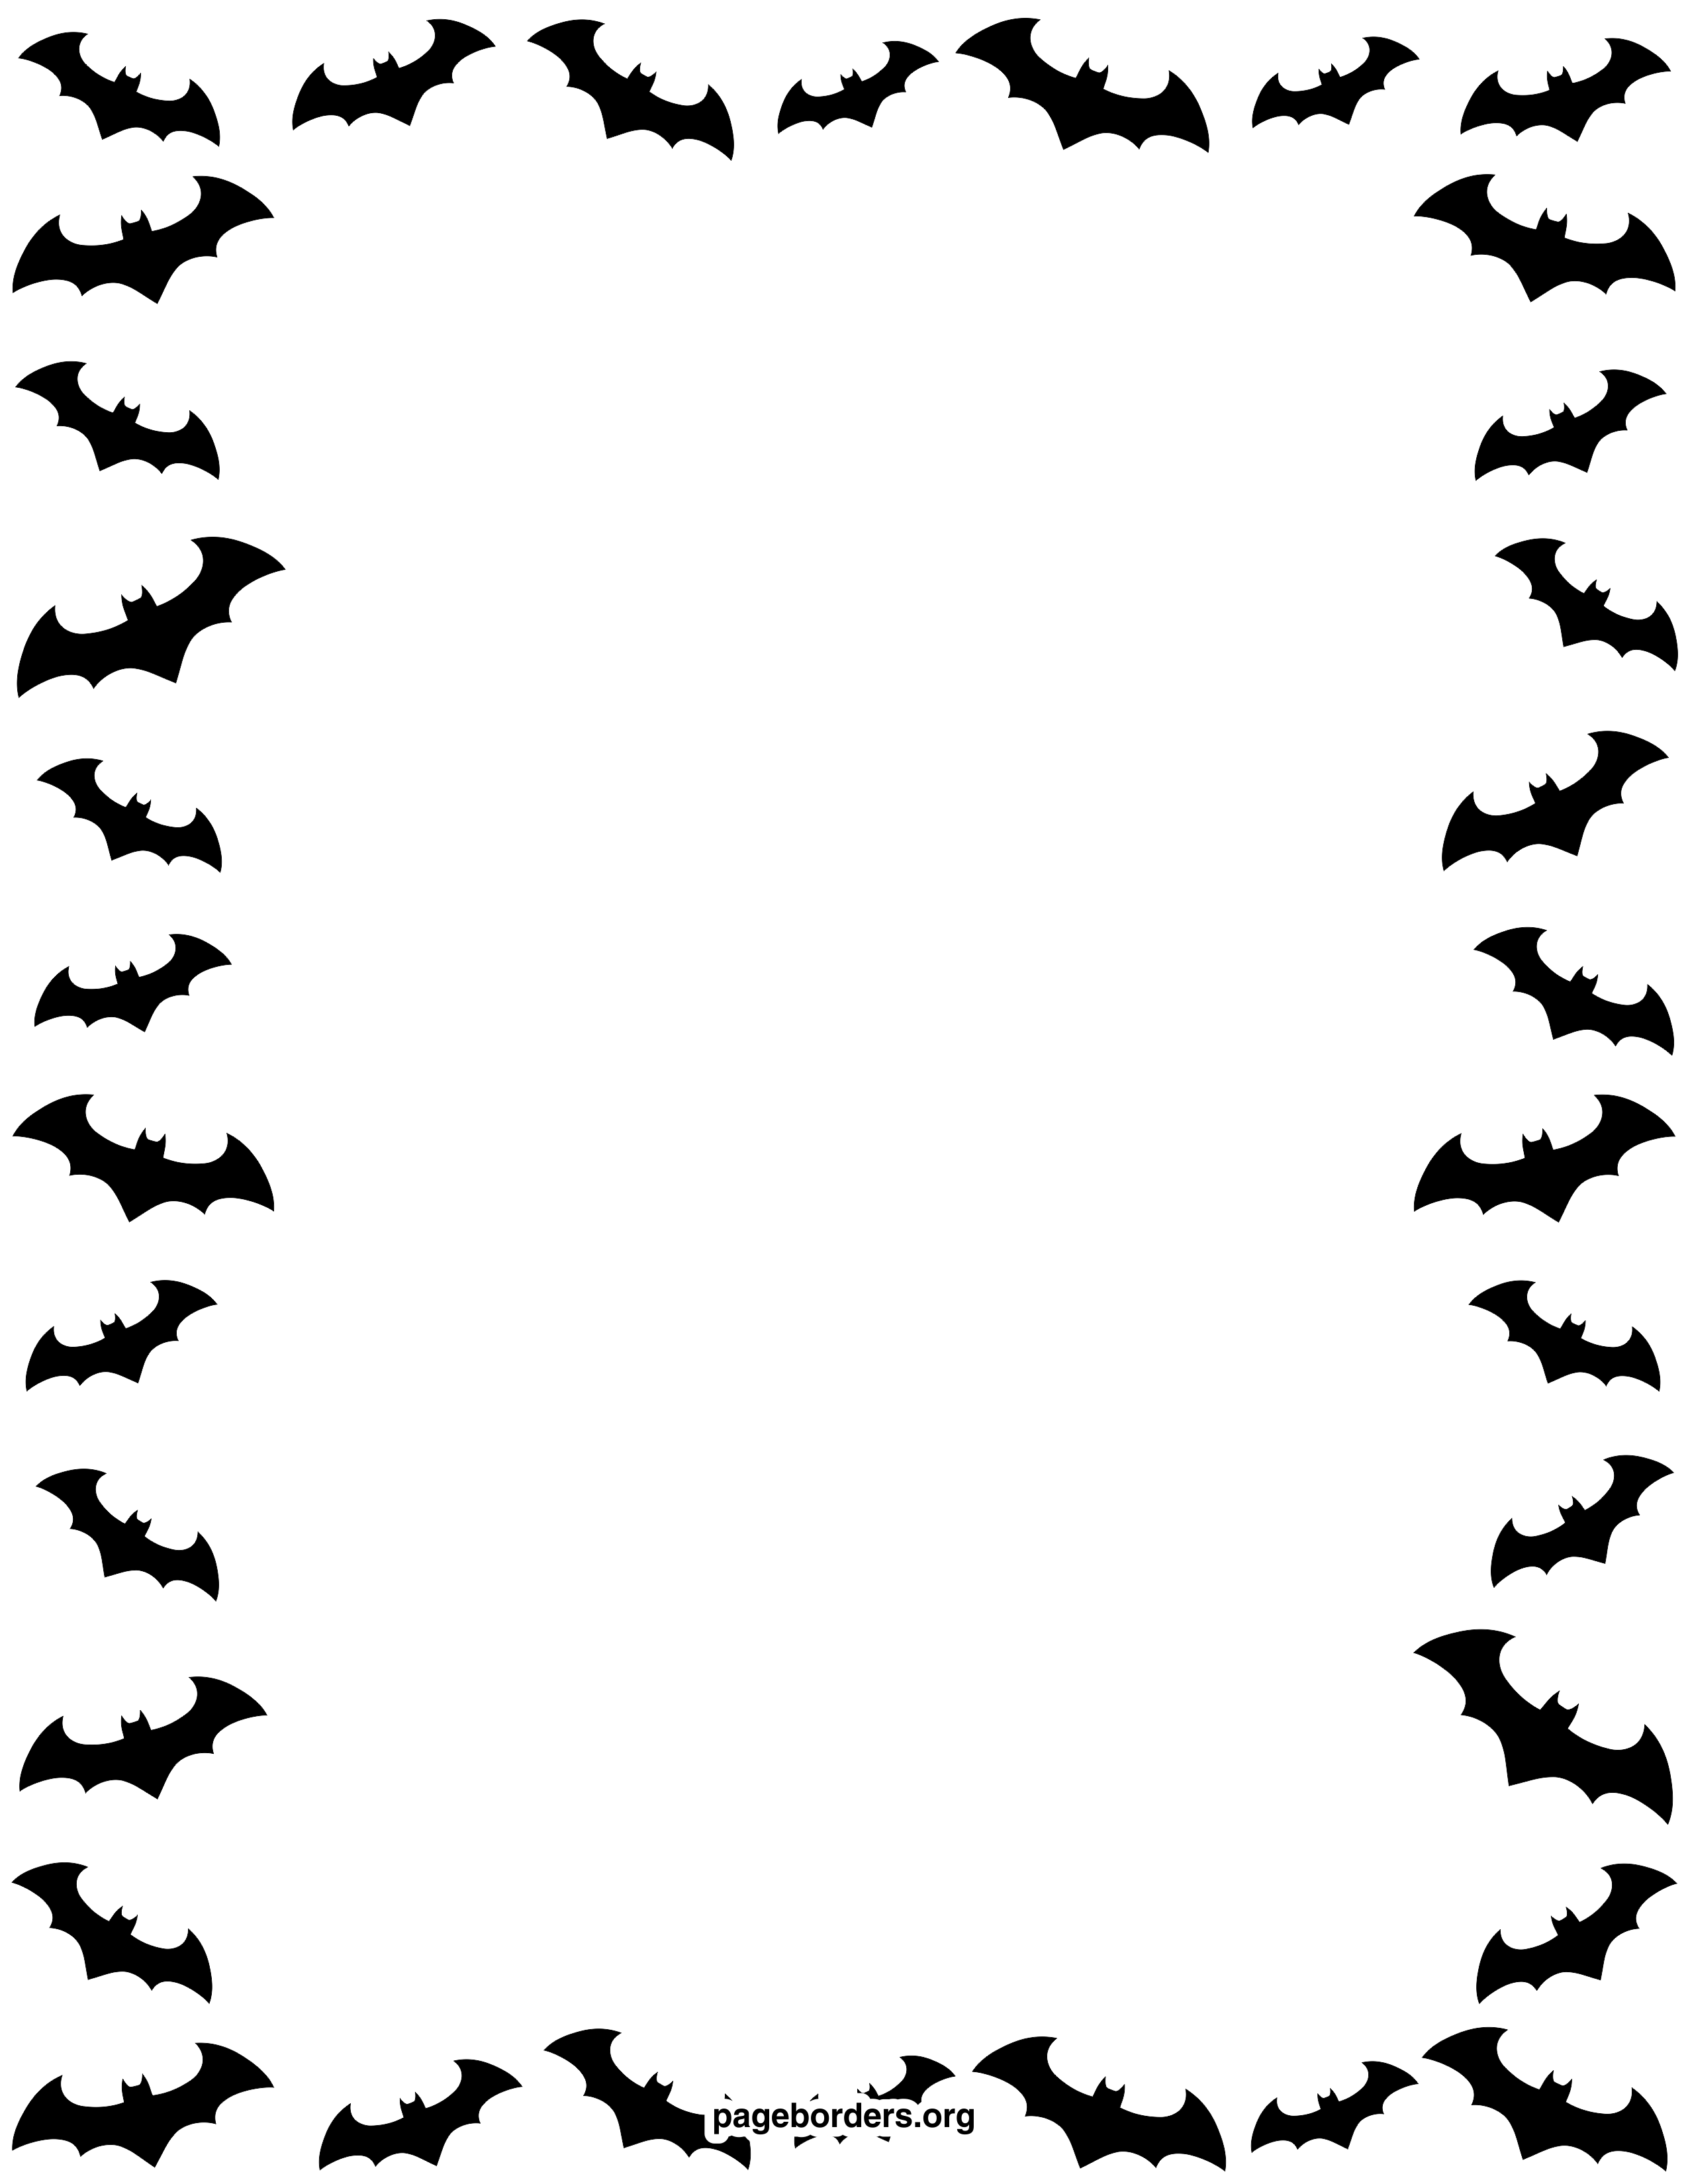 A word document border for halloween clipart